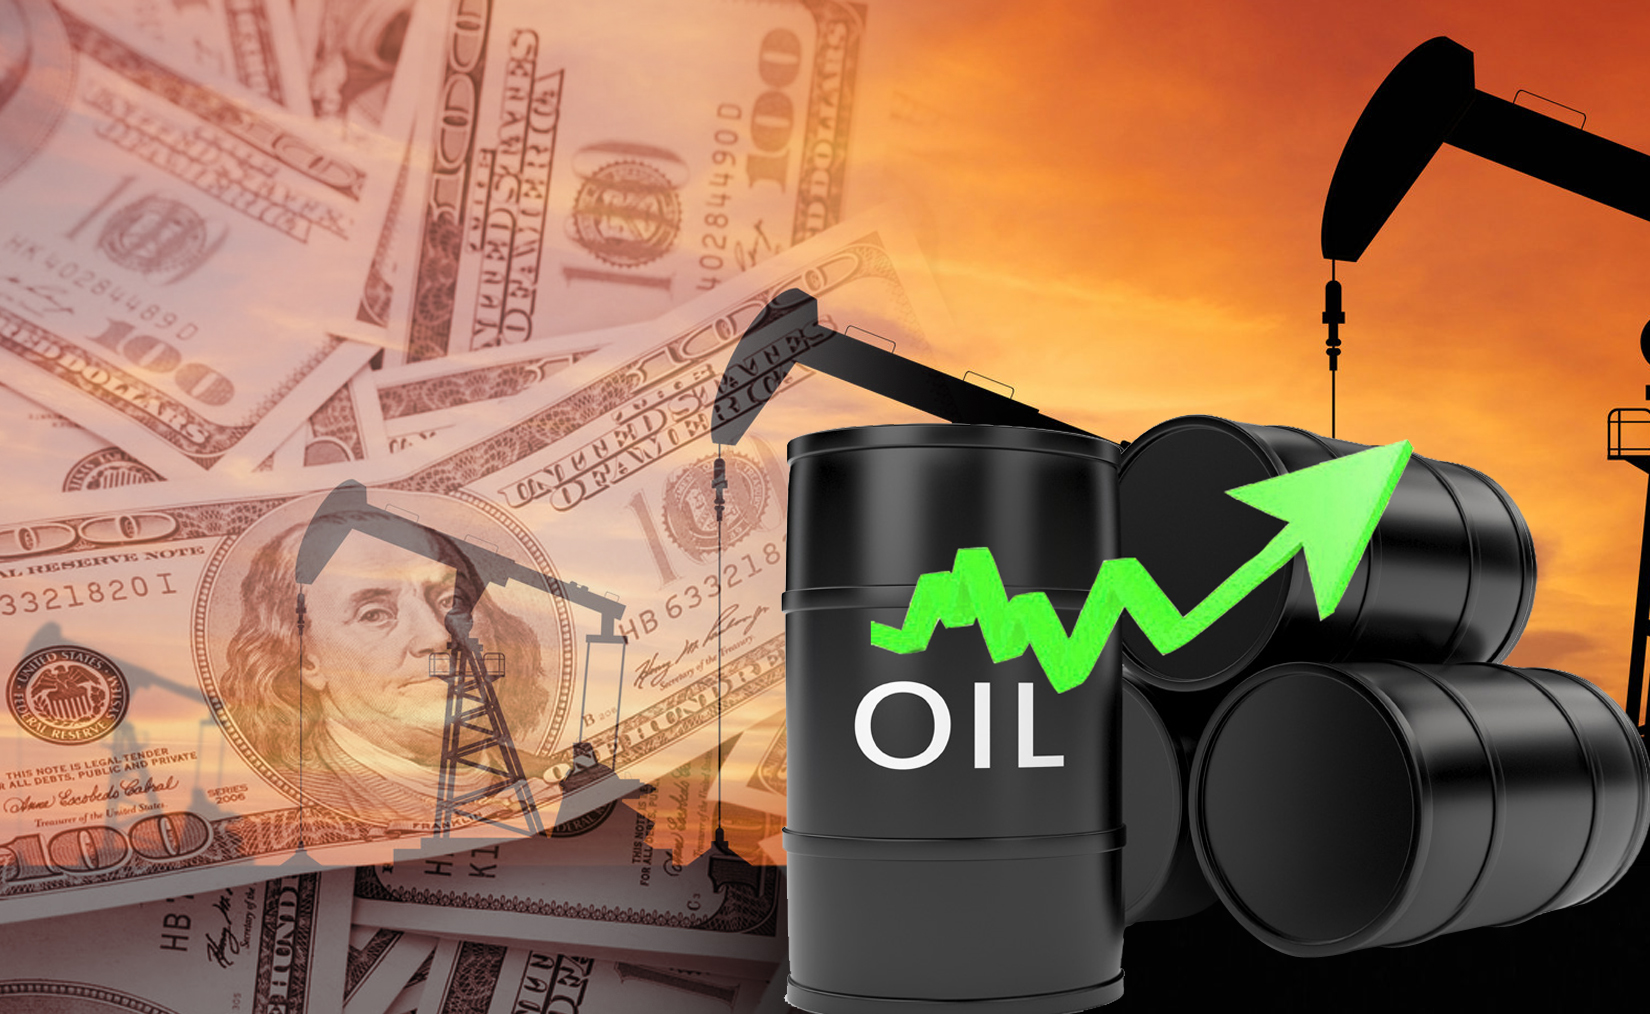 Price of Kuwaiti oil up 3 cents to USD 41                                                                                                                                                                                                                 